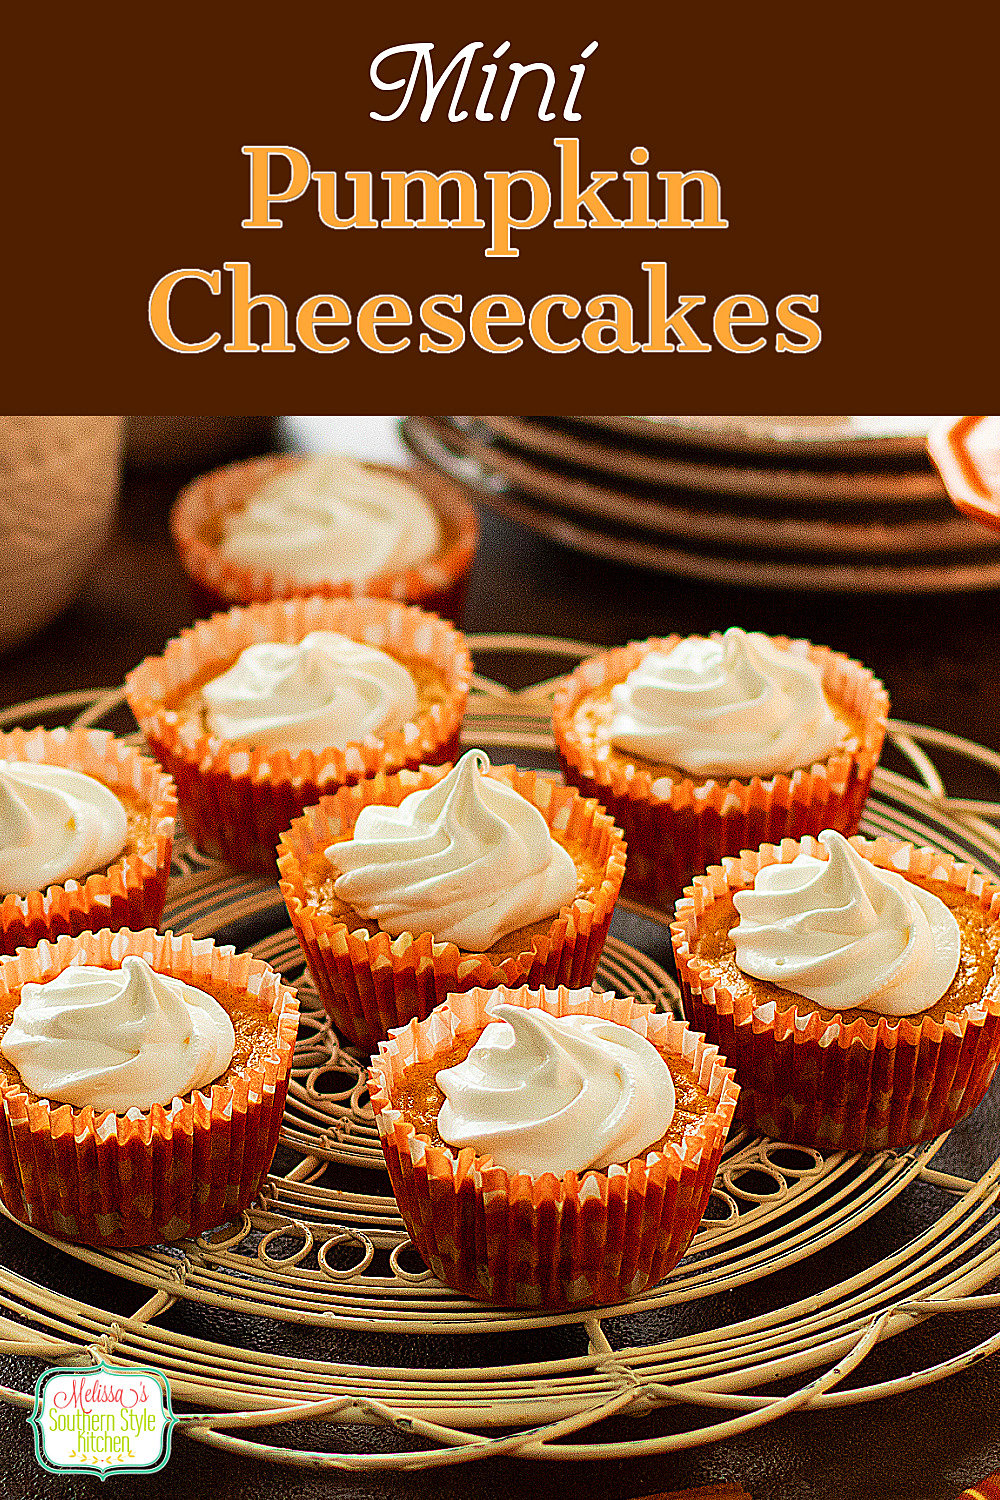 These easy Mini Pumpkin Cheesecakes will make a delicious single serving addition to your fall desserts menu. #pumpkincheesecake #mincheesecakes #pumpkindesserts #easyrecipes #thanksgivingrecipes #pumpkinpie #pumpkintarts #minipumpkincheesecakes via @melissasssk